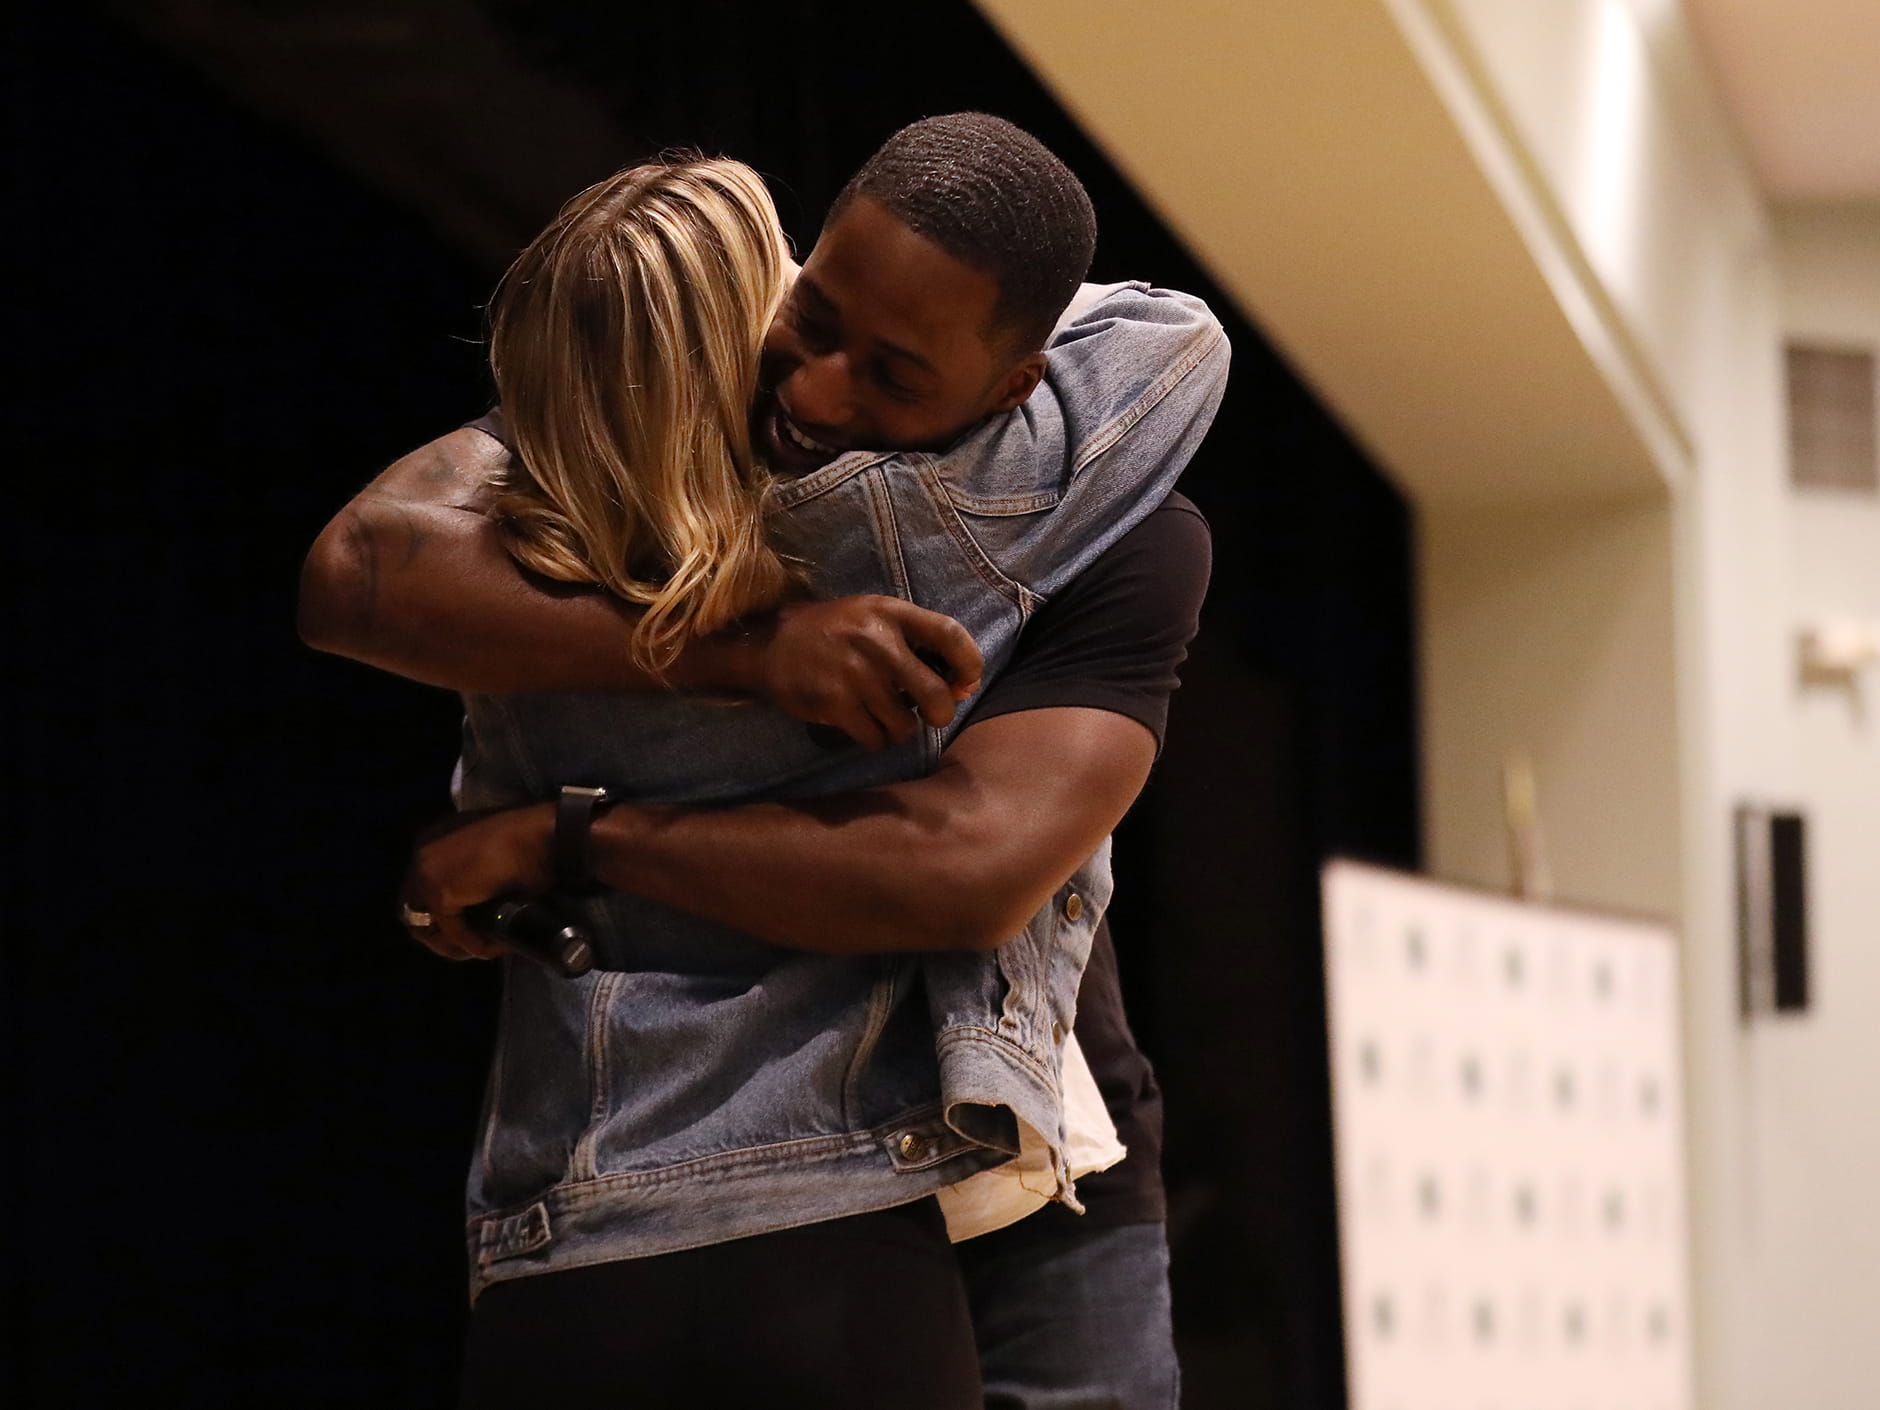 Ken E. Nwadike Jr., founder of the Free Hugs Project, gives a hug to a student as part of his message of peace.